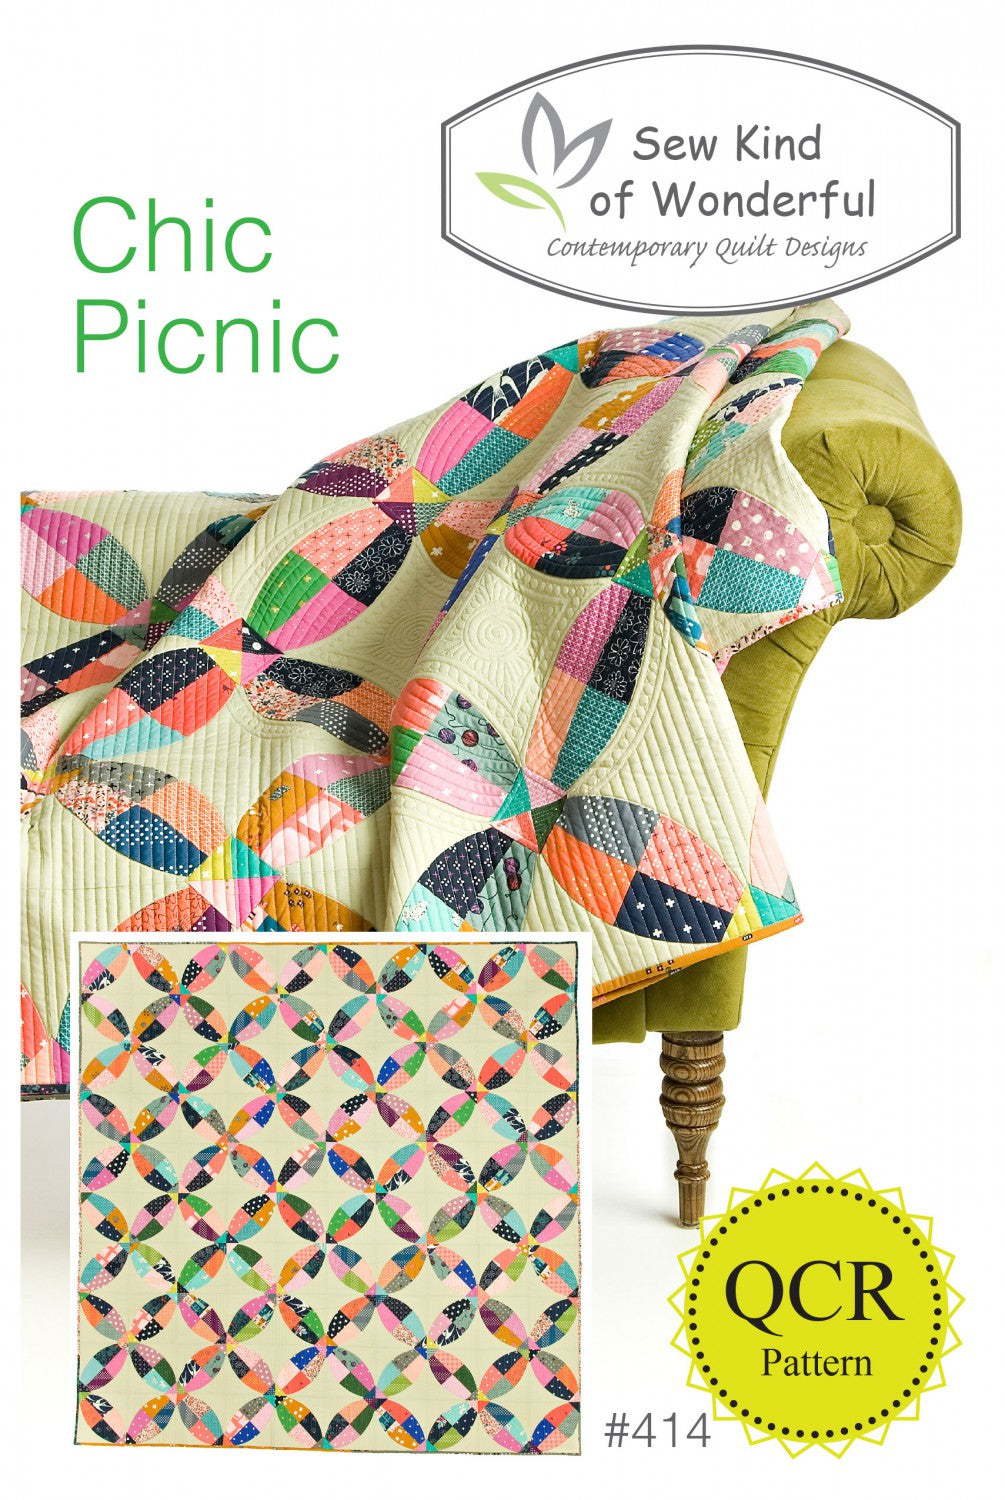 Chic Picnic - Quilt Pattern - Sew Kind of Wonderful